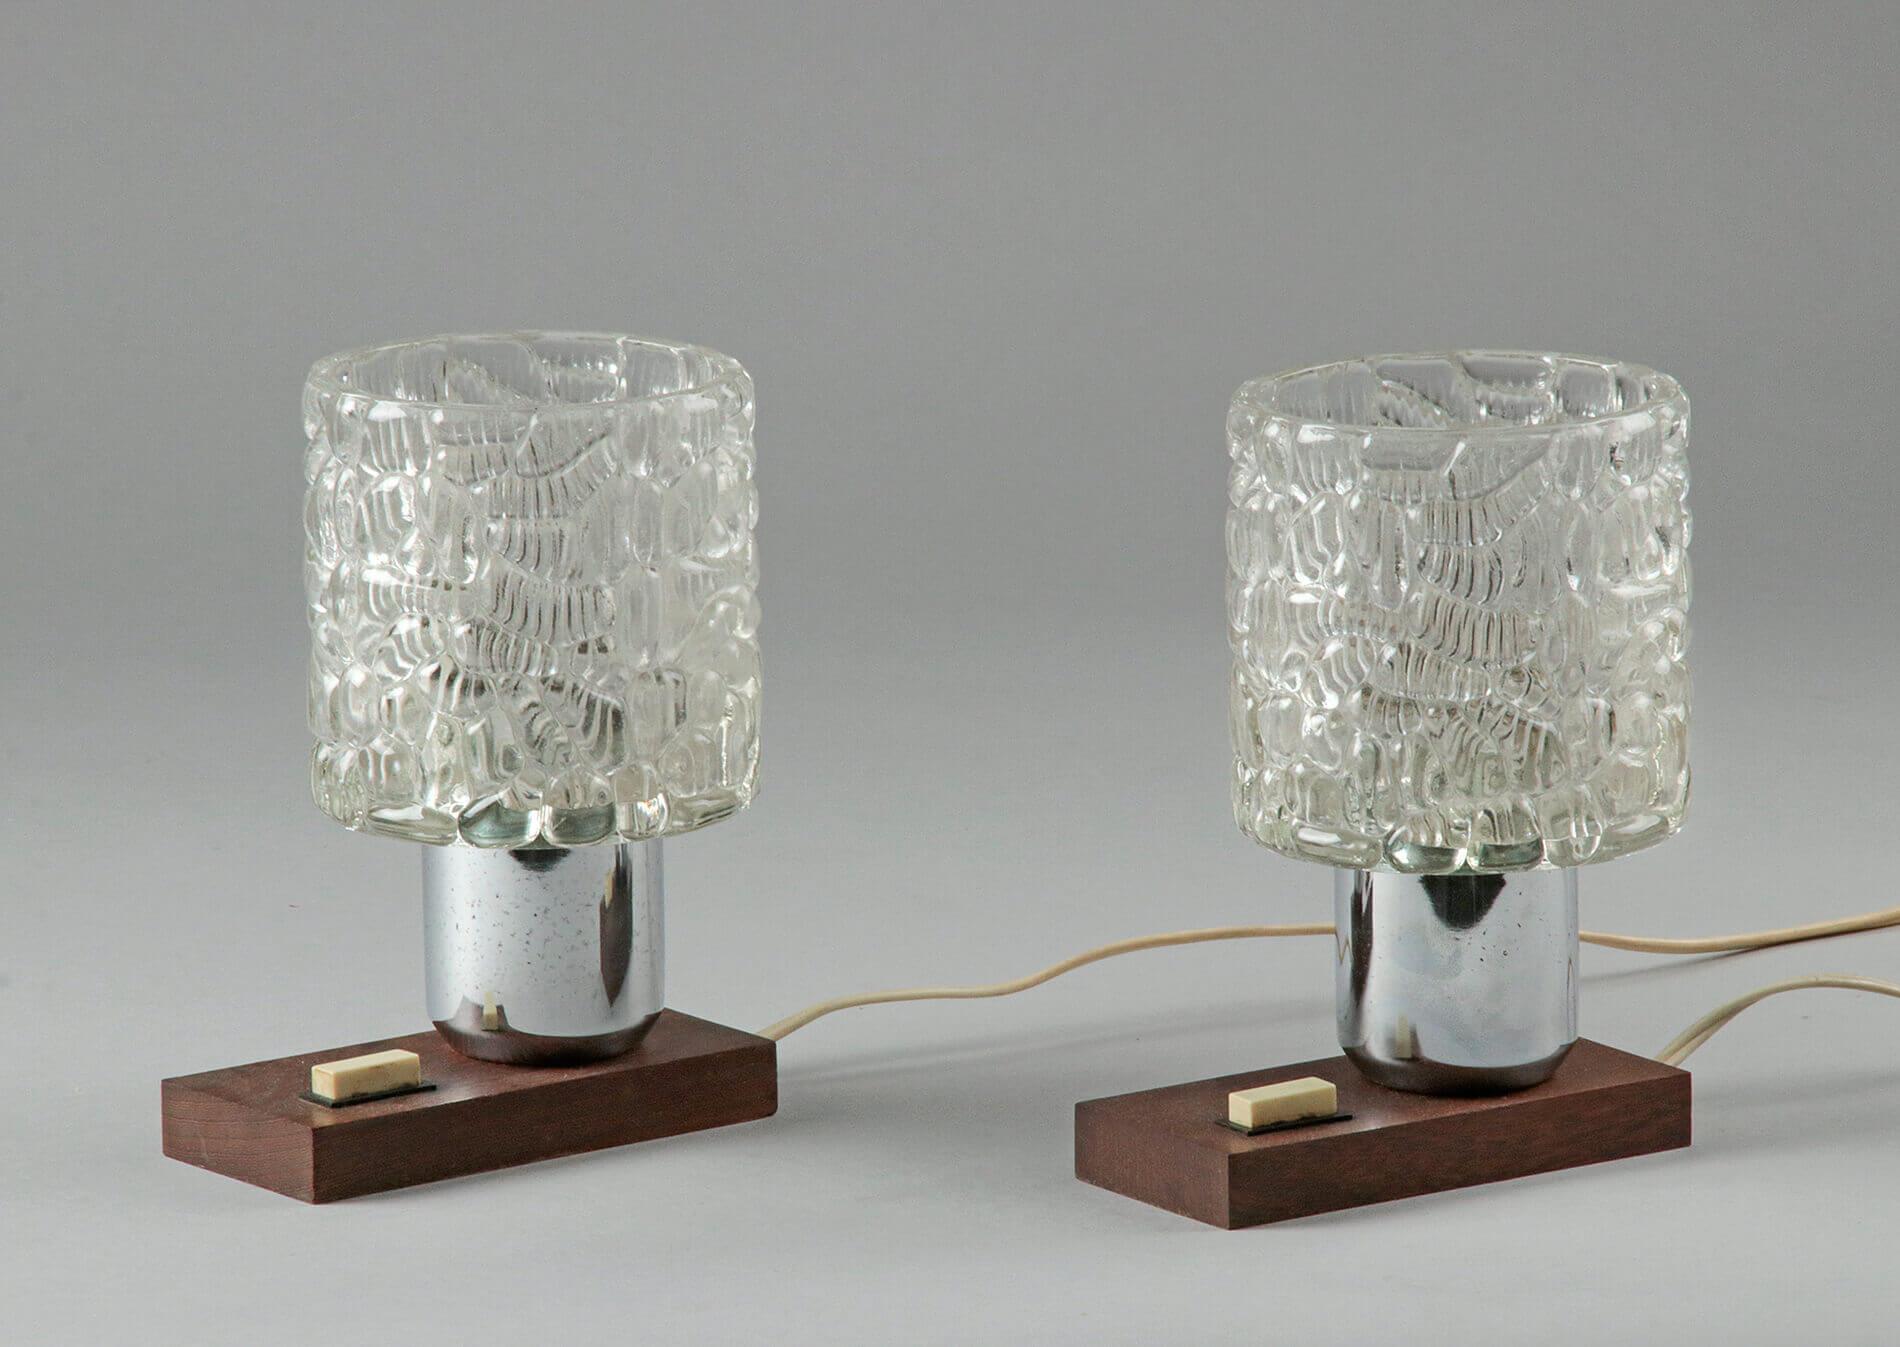 Pair of Mid-20th Century Modern Design Table Lamps 1